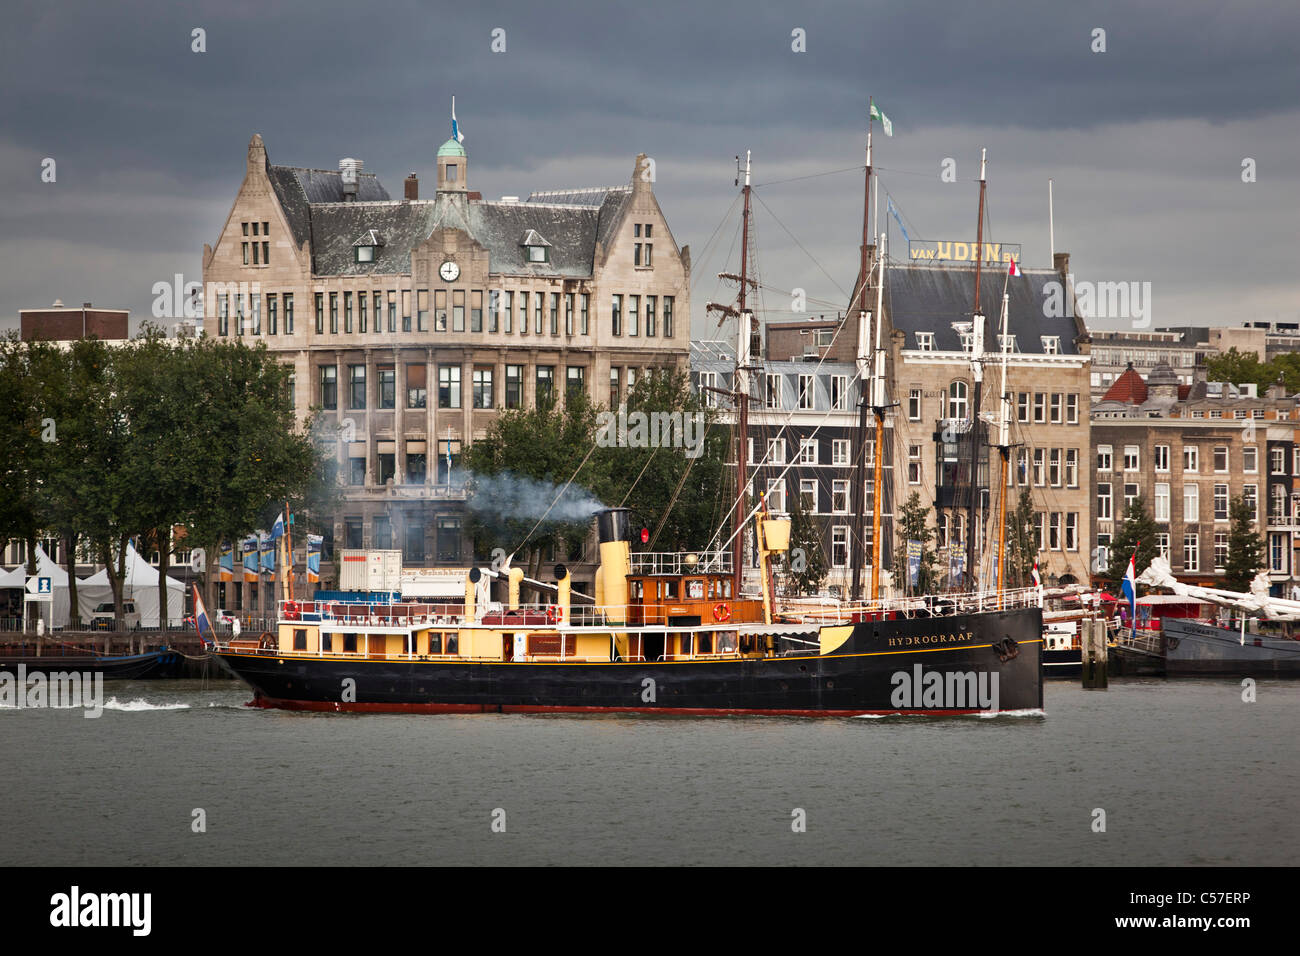 The Netherlands, Rotterdam, Steamboat in city centre. Stock Photo